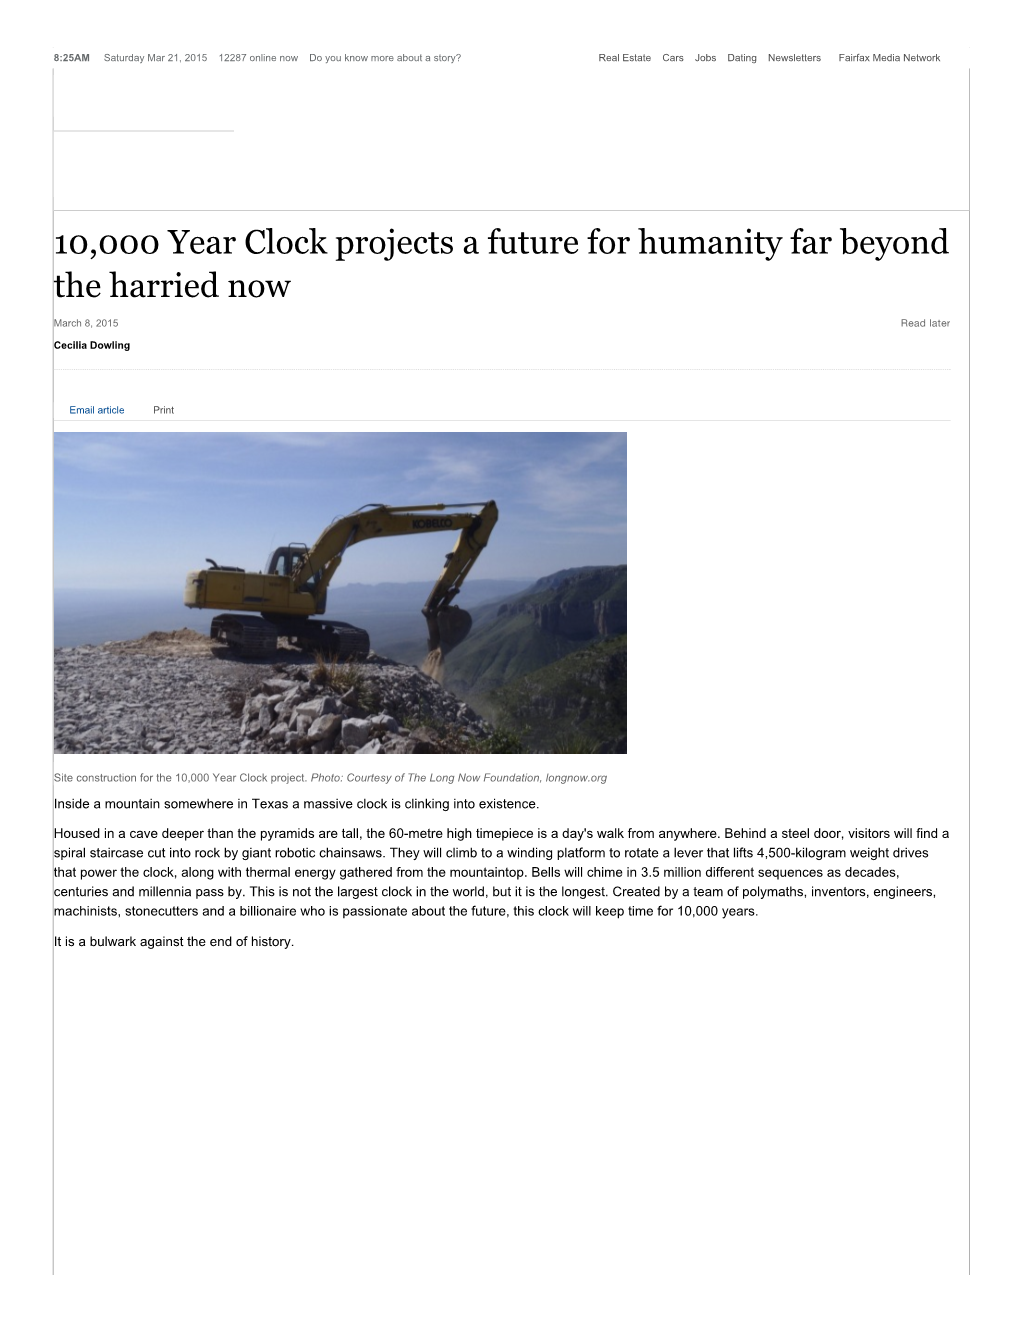 10,000 Year Clock Projects a Future for Humanity Far Beyond the Harried Now